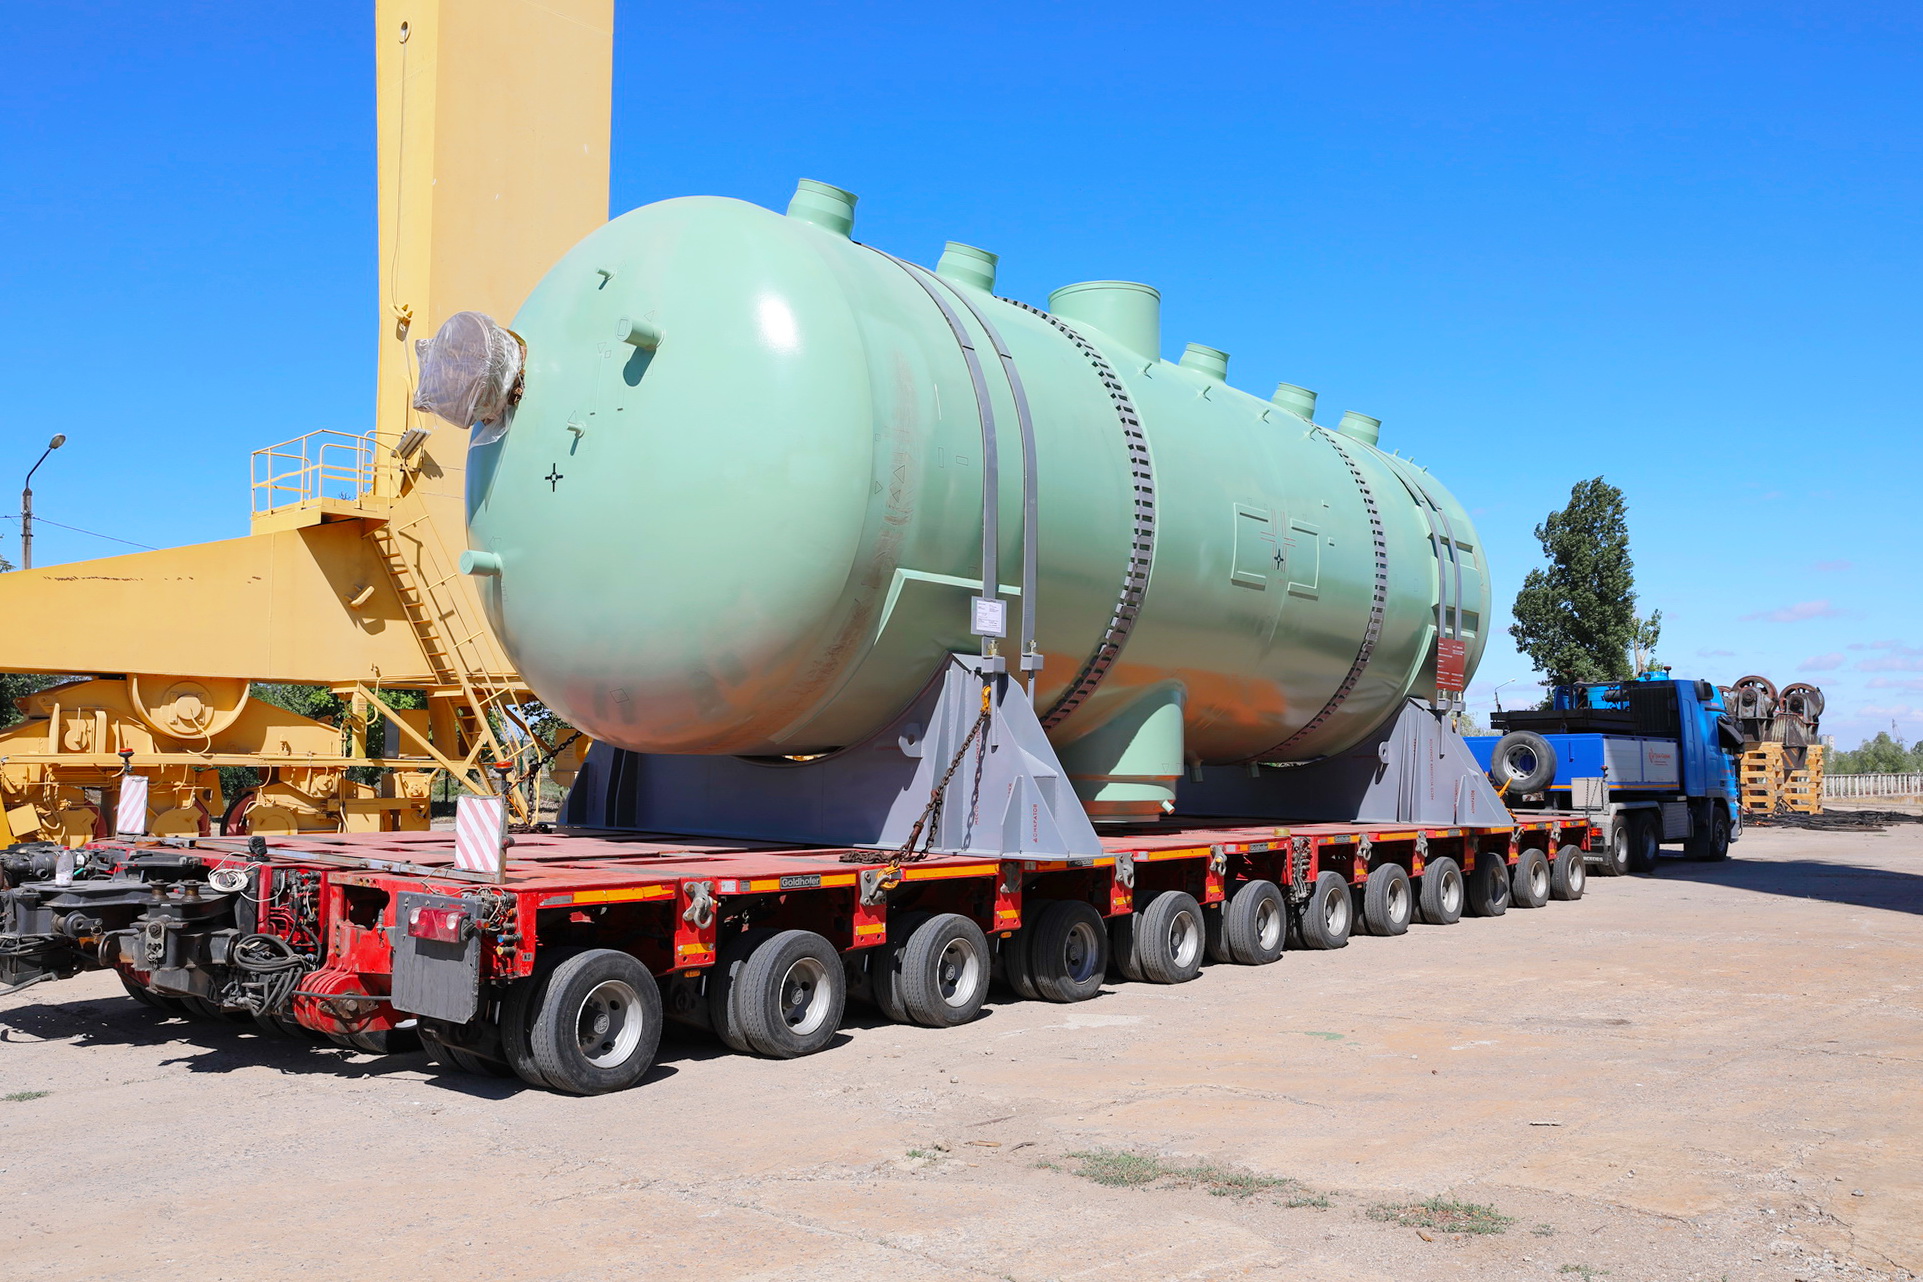 Atommash shipped a Steam generator for 4th power unit of Kudankulam NPP in India